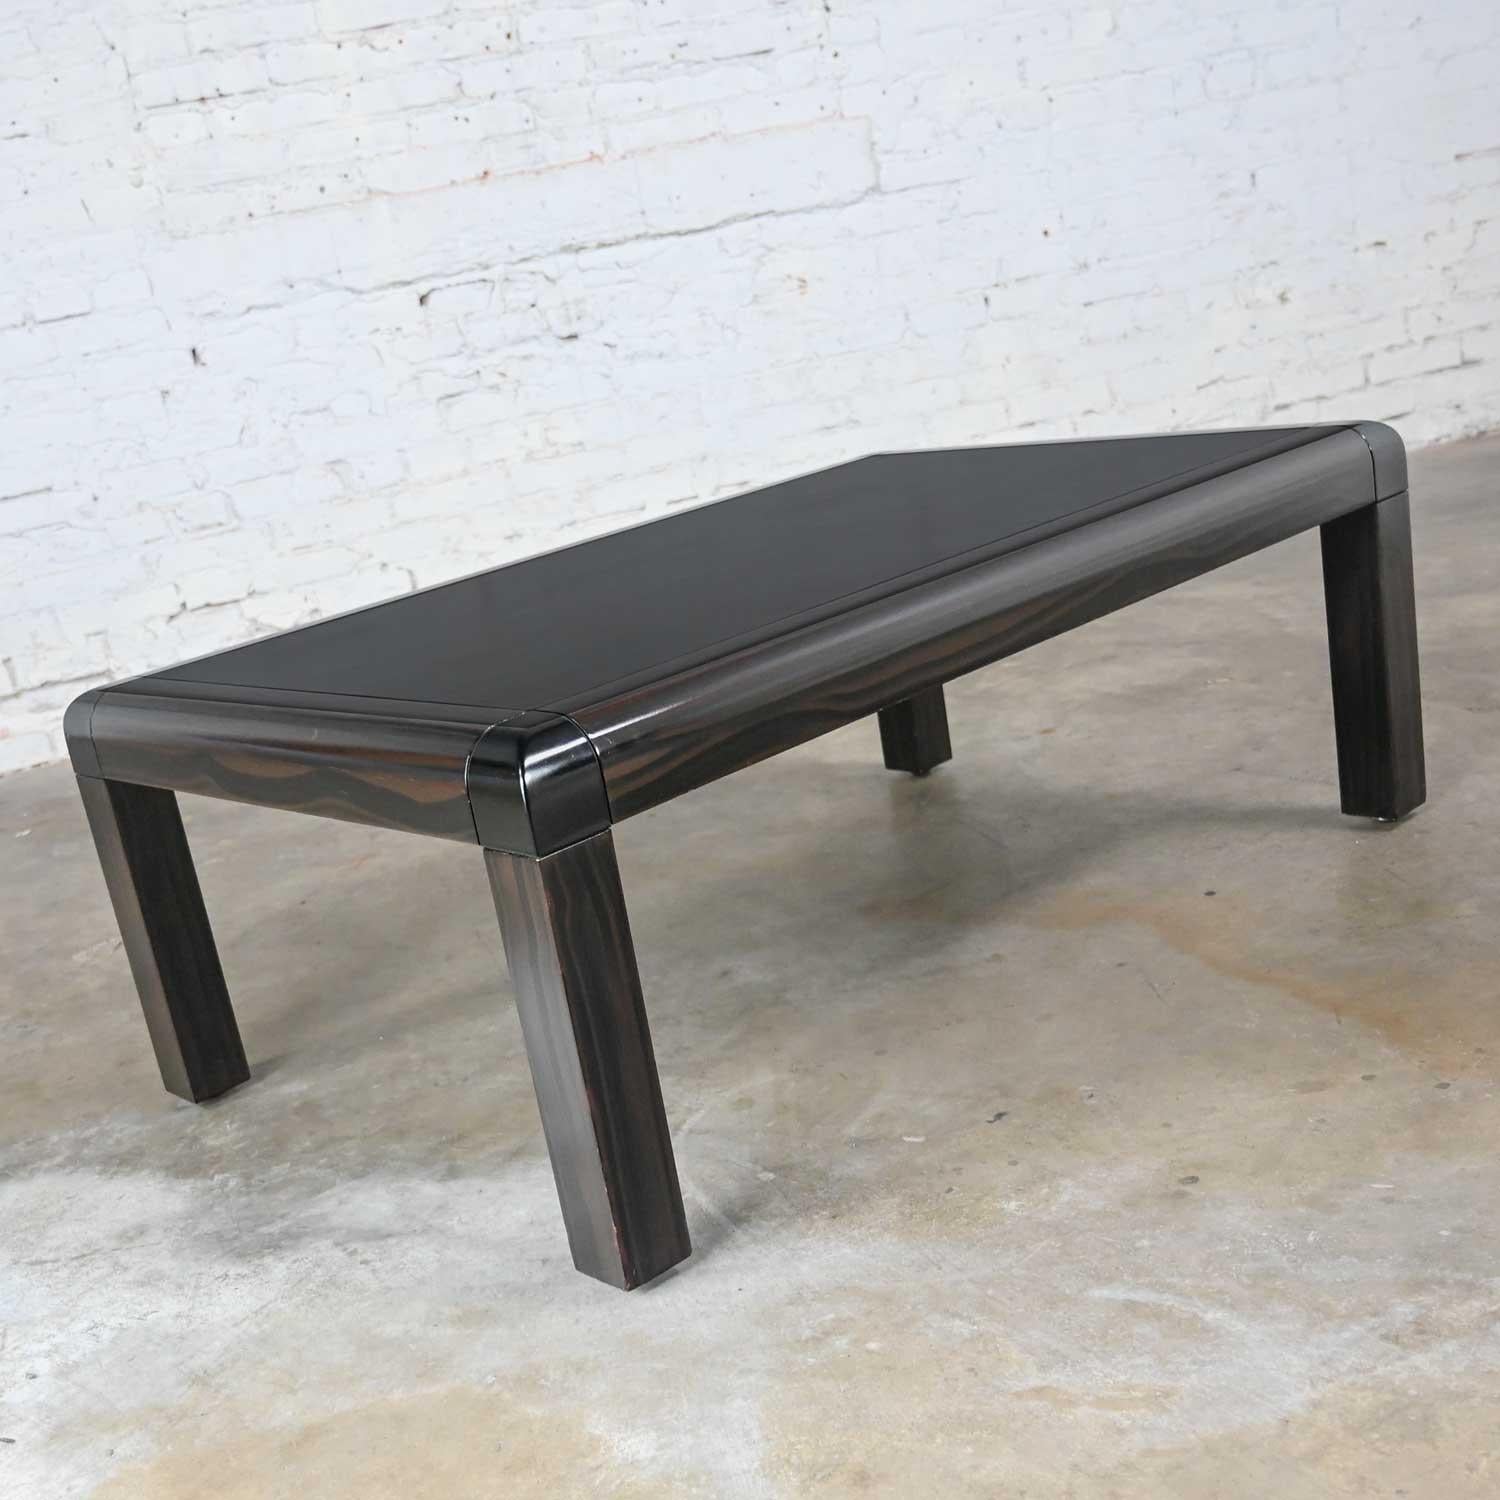 Handsome vintage modern coffee table with dark faux wood lacquered edges and legs, black lacquered waterfall style corners, and a black leather (possibly goatskin) top insert. The bottom of the table bears the prestigious leather tag signed by Karl